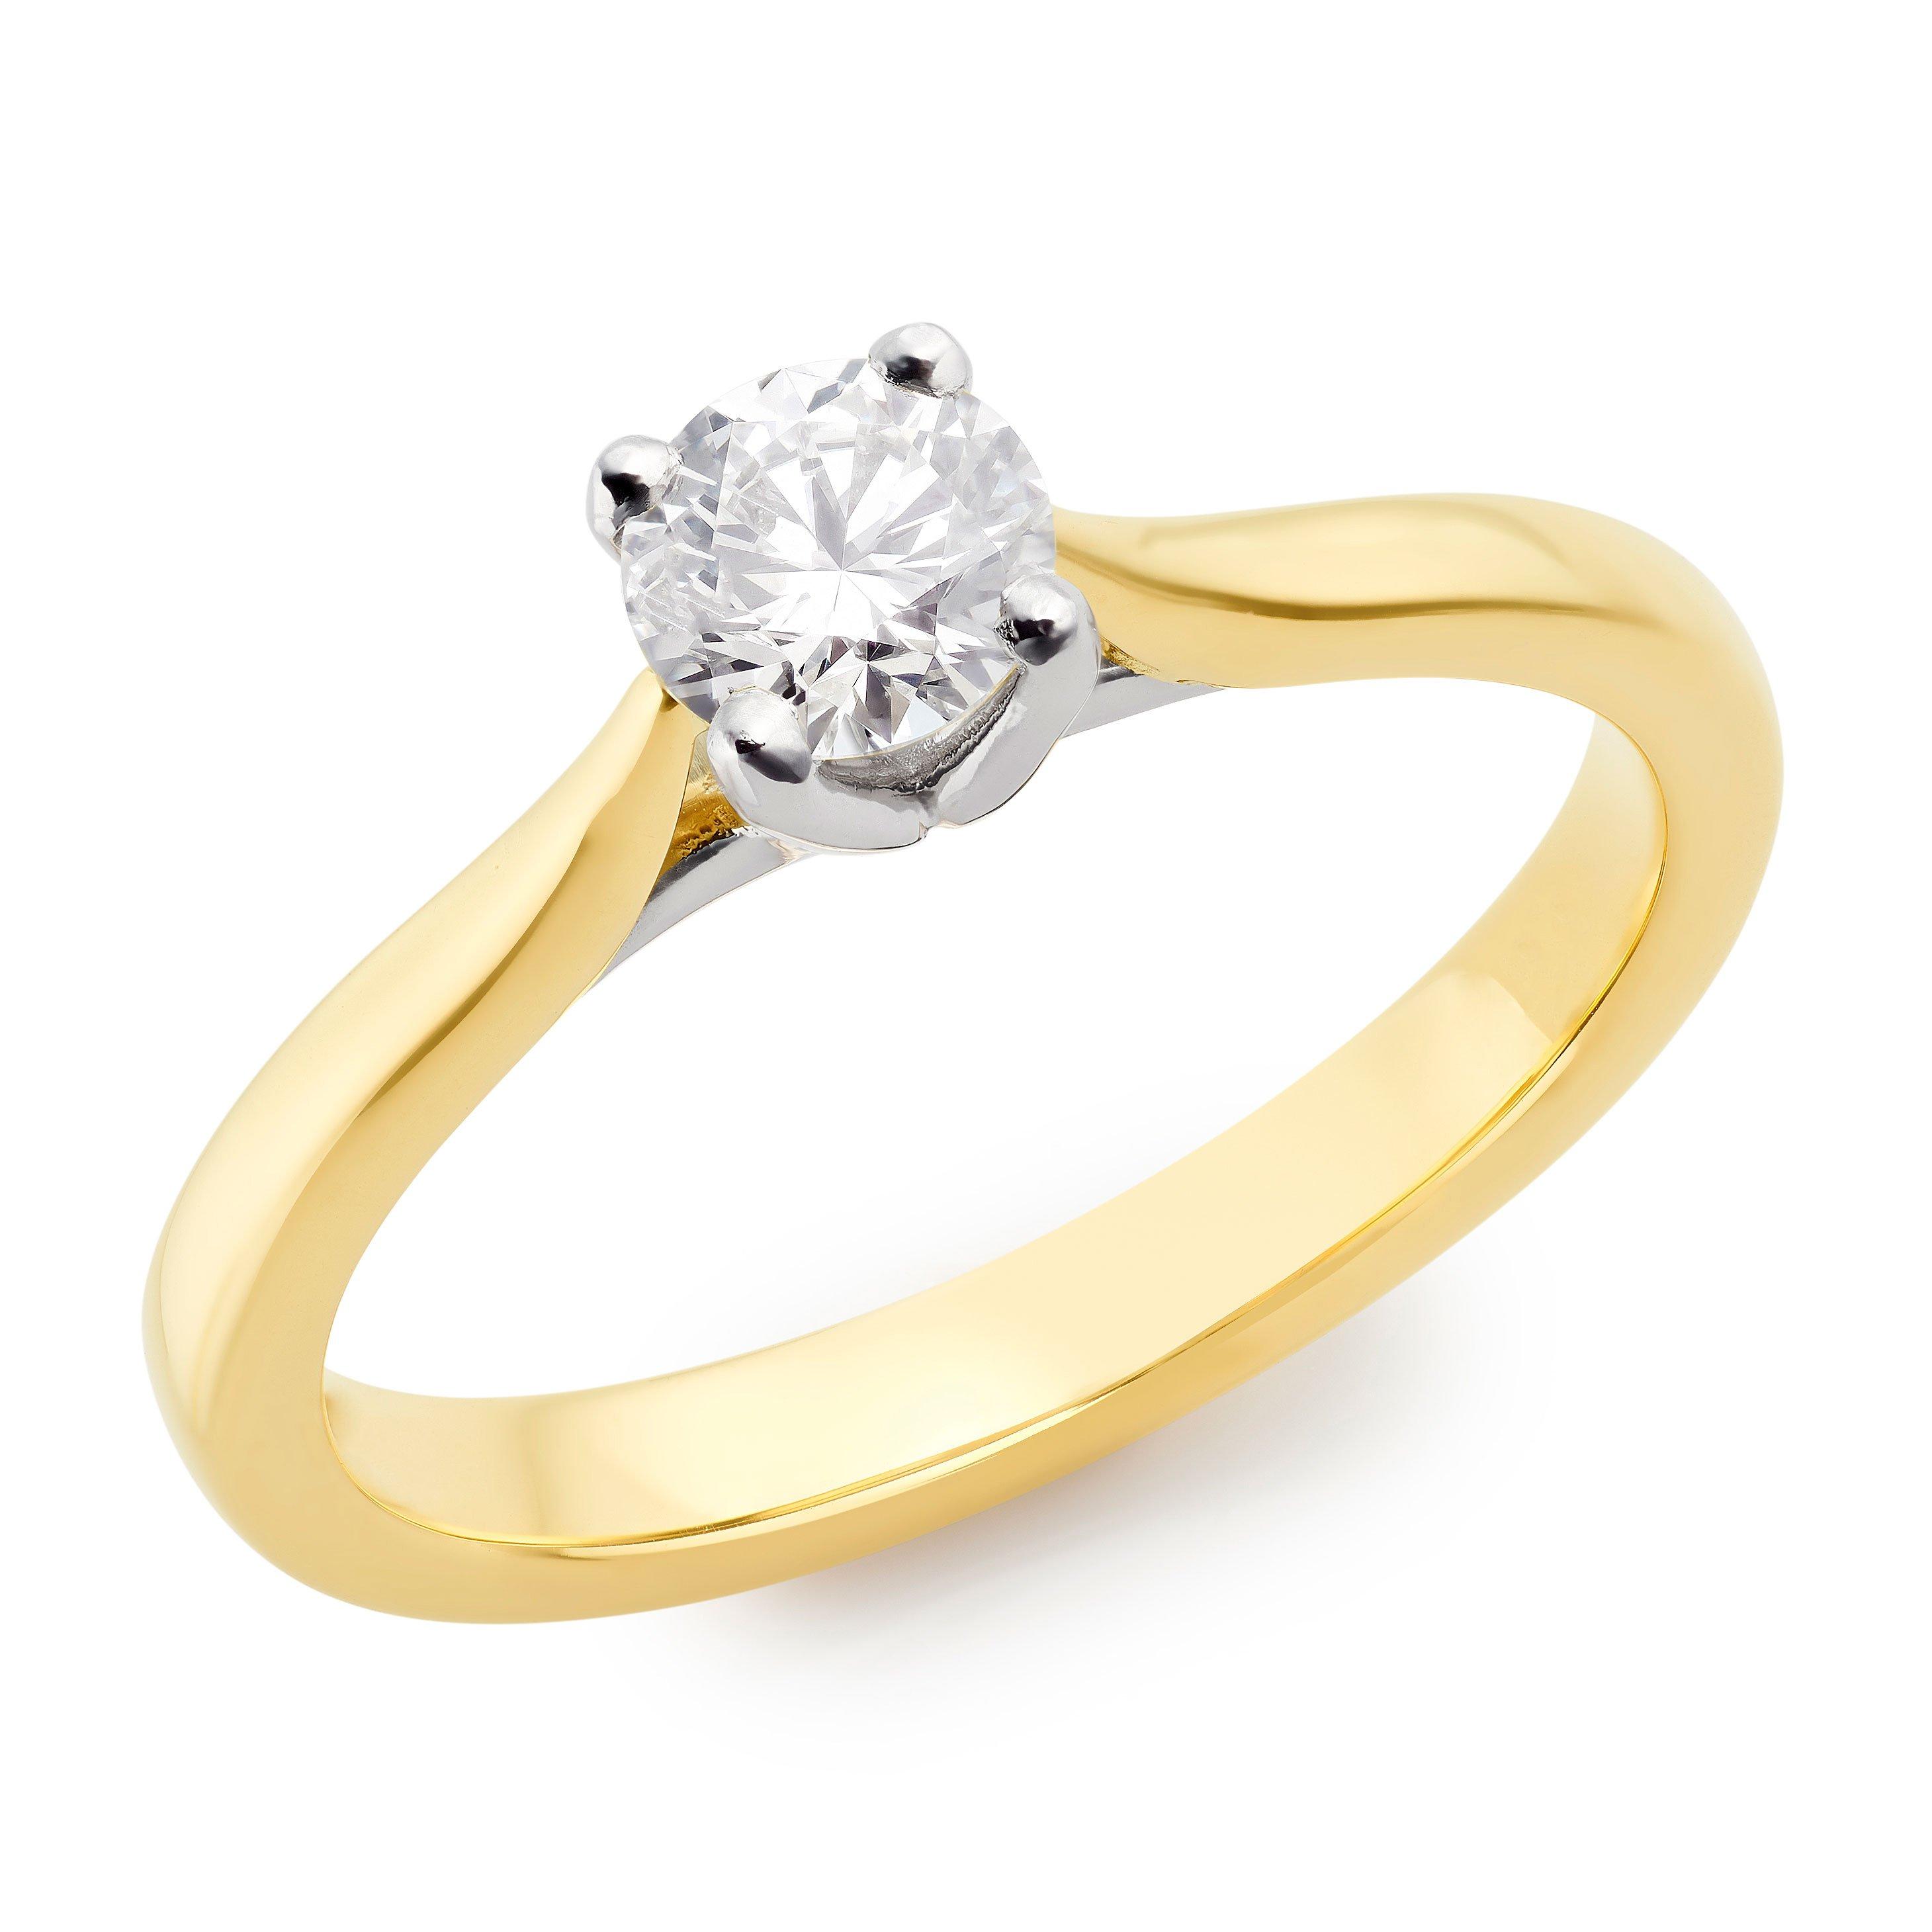 18ct Yellow Gold Diamond Solitaire Ring | 0133643 | Beaverbrooks the ...